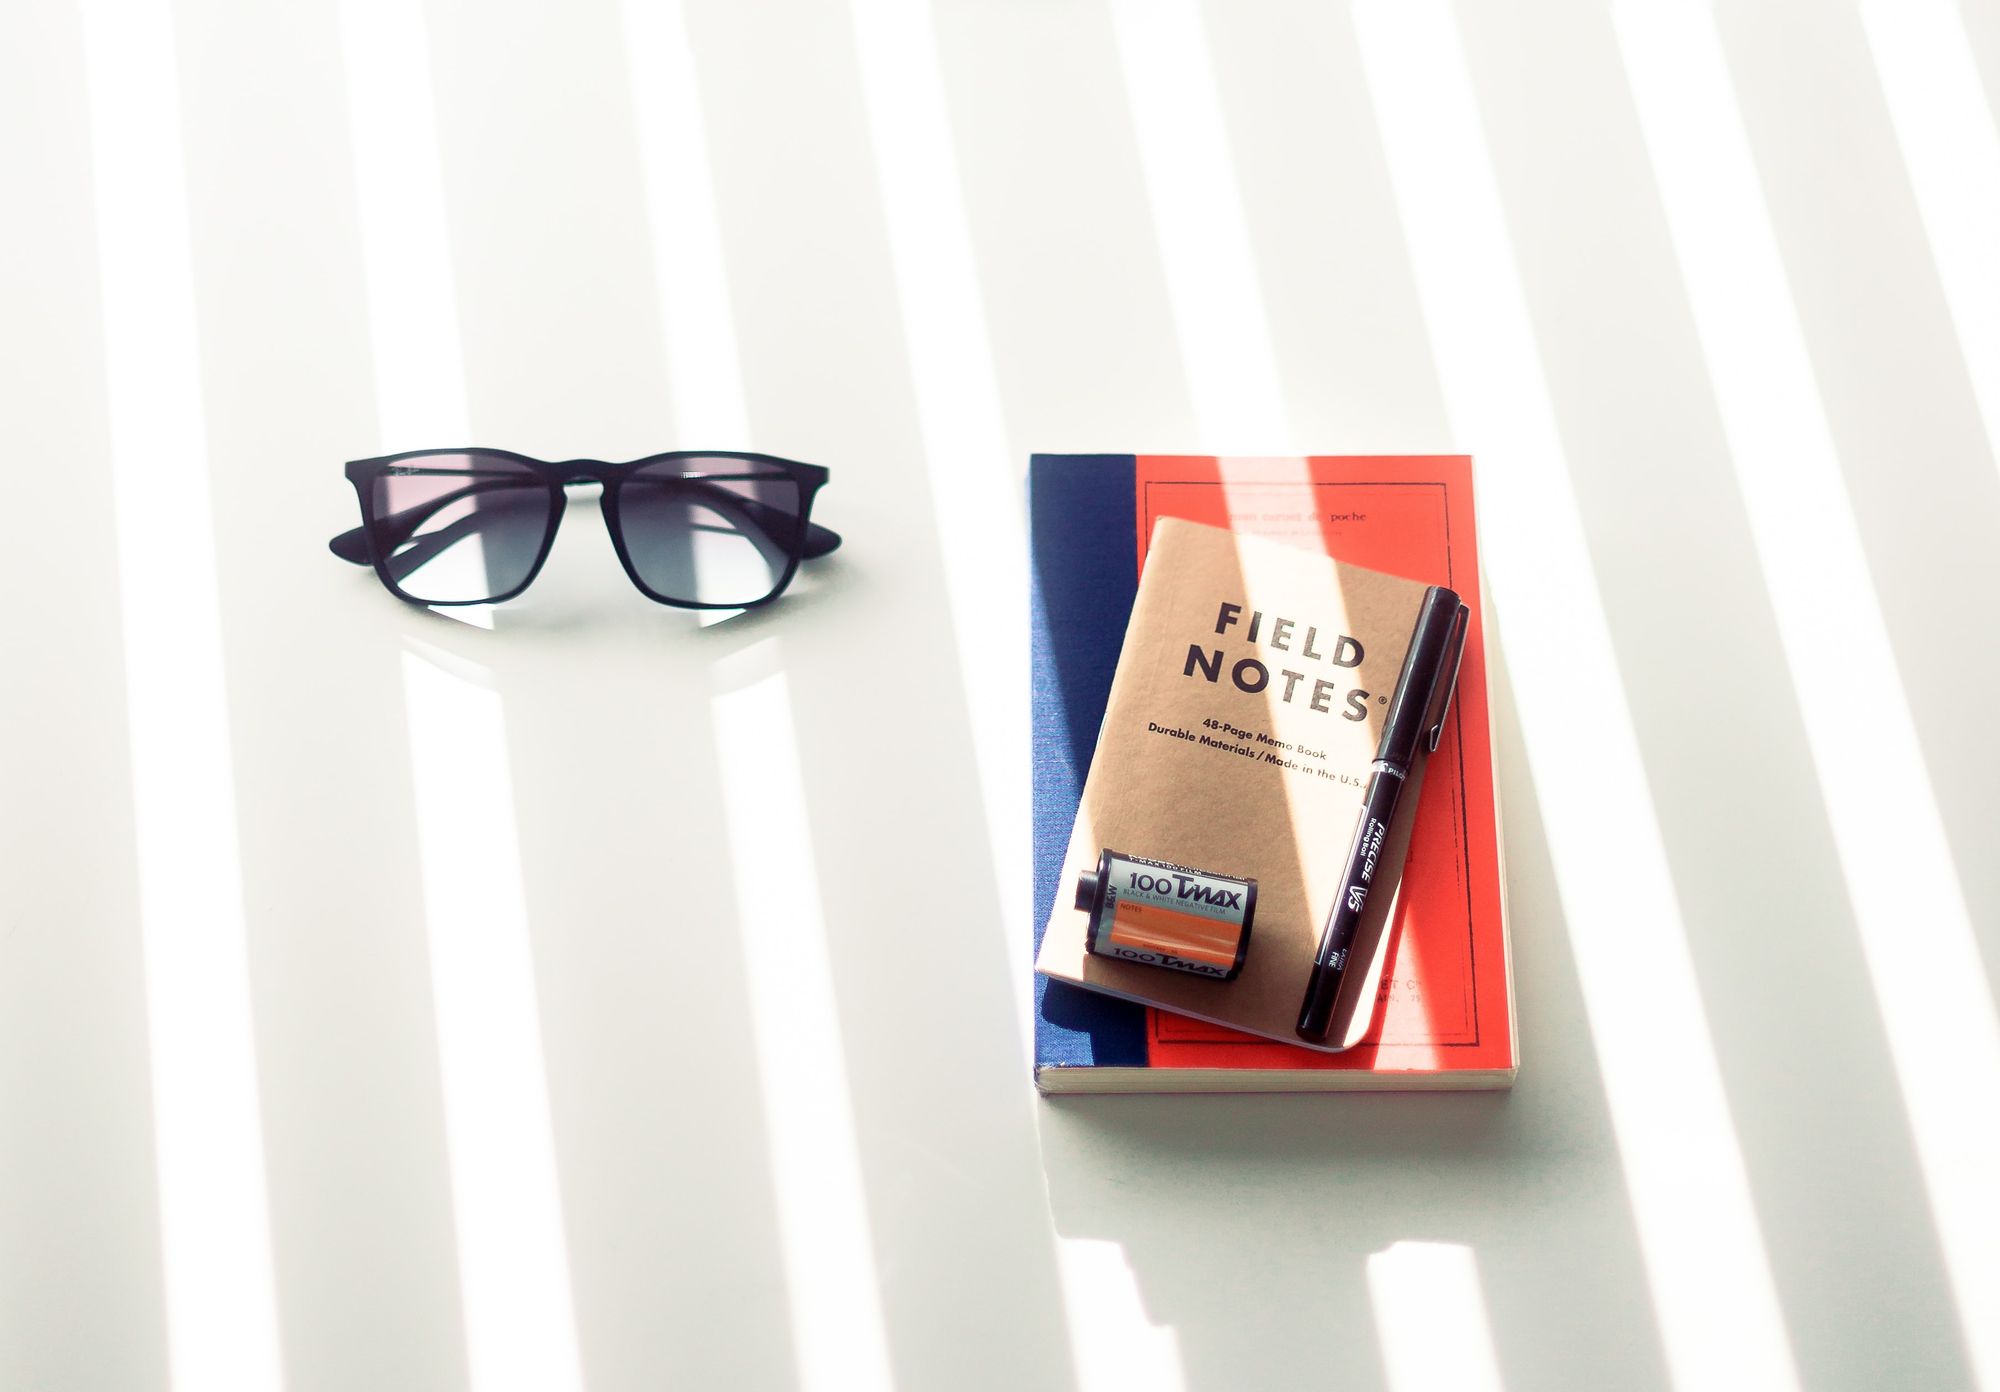 Sunglasses and note books